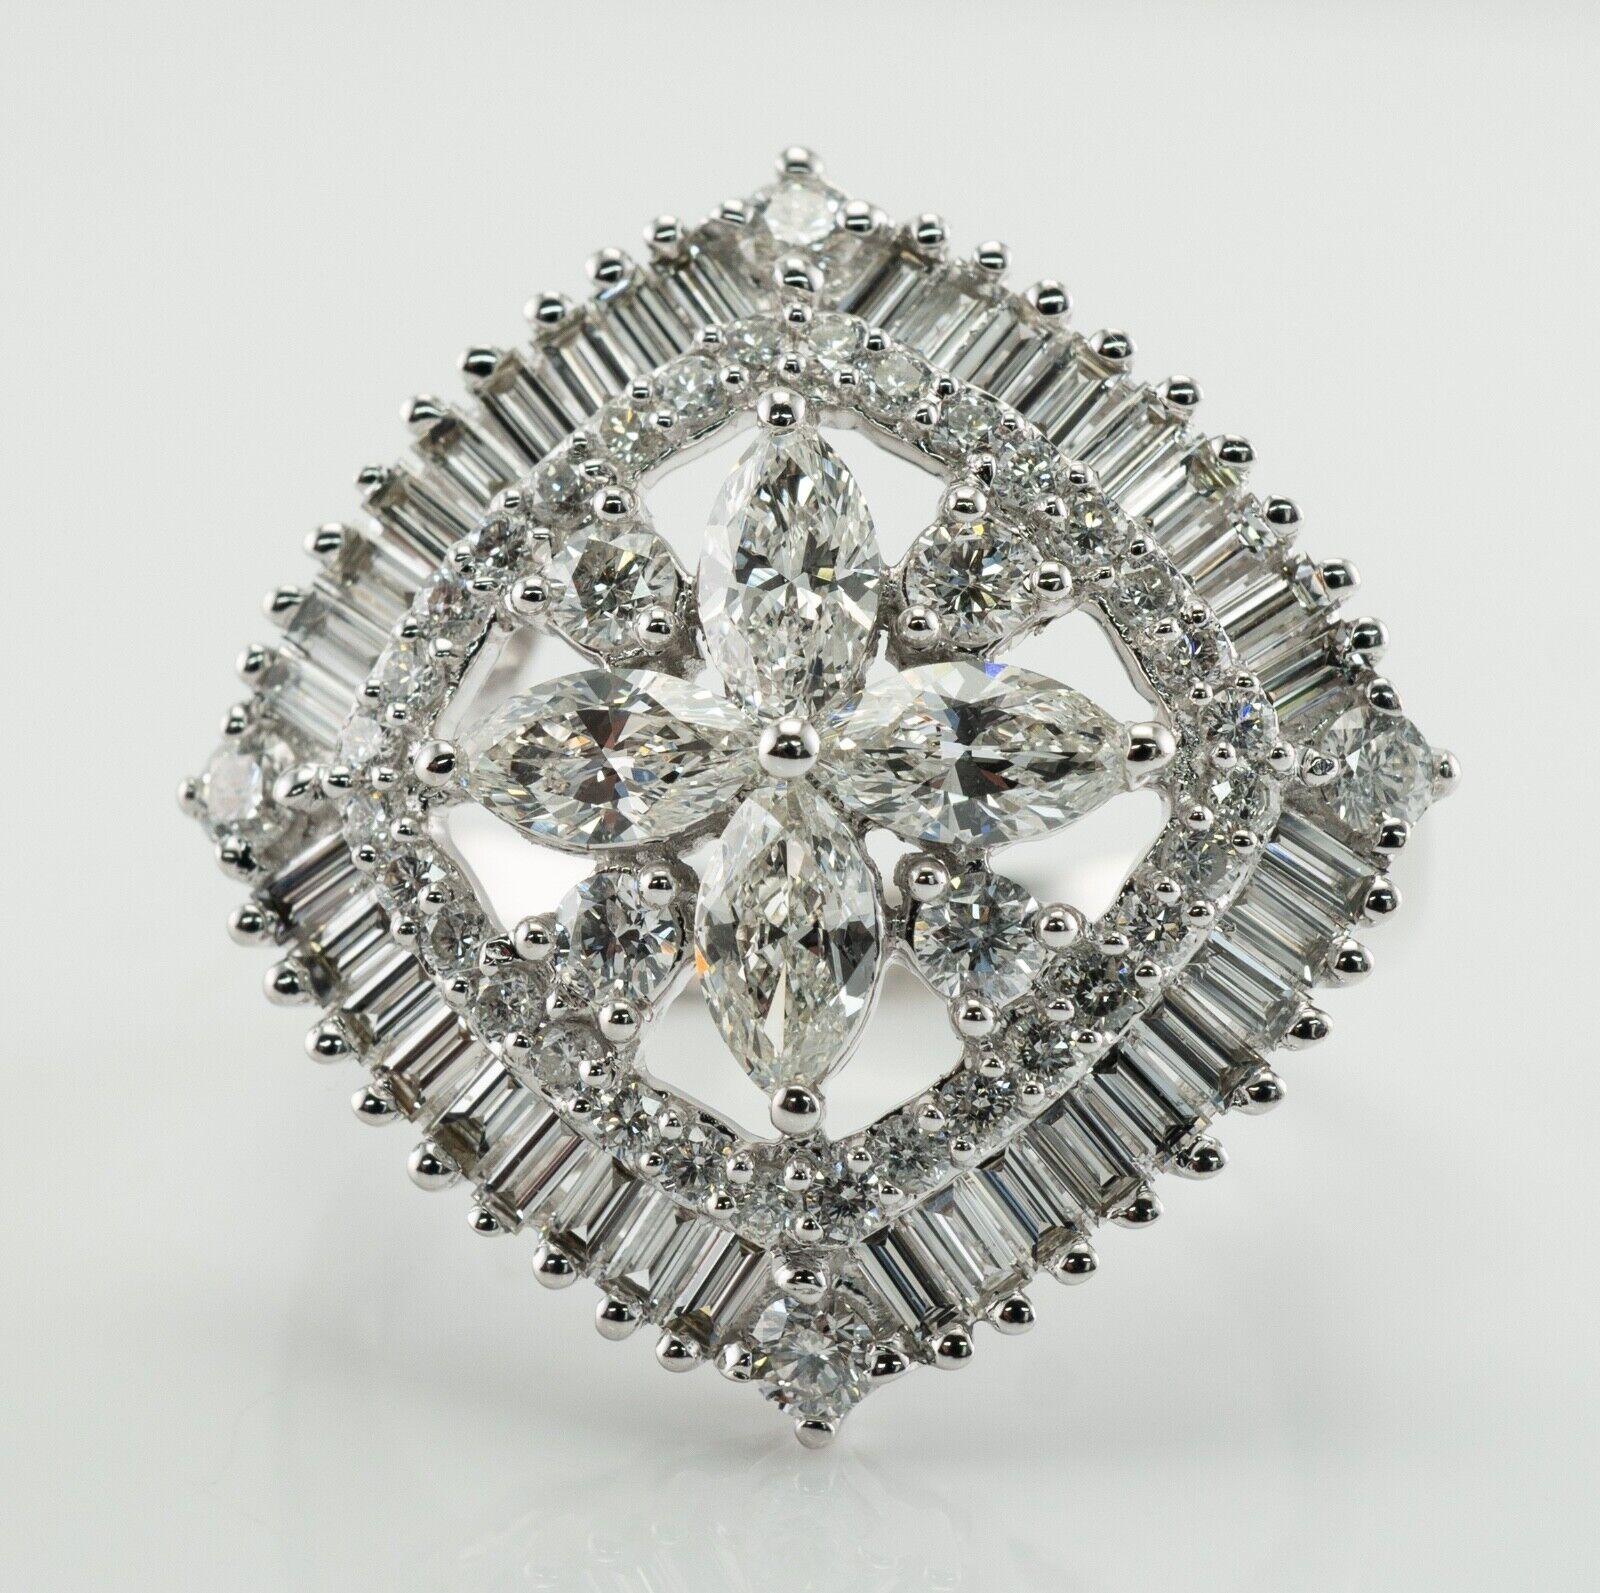 This spectacular ring is finely crafted in solid 14K White Gold. 
Four center marquise diamonds are VS1 clarity and H color totaling .60 carat.
Eight (4+4) round brilliant cut diamonds in the center total .26 carat of SI1 clarity and H color.
32